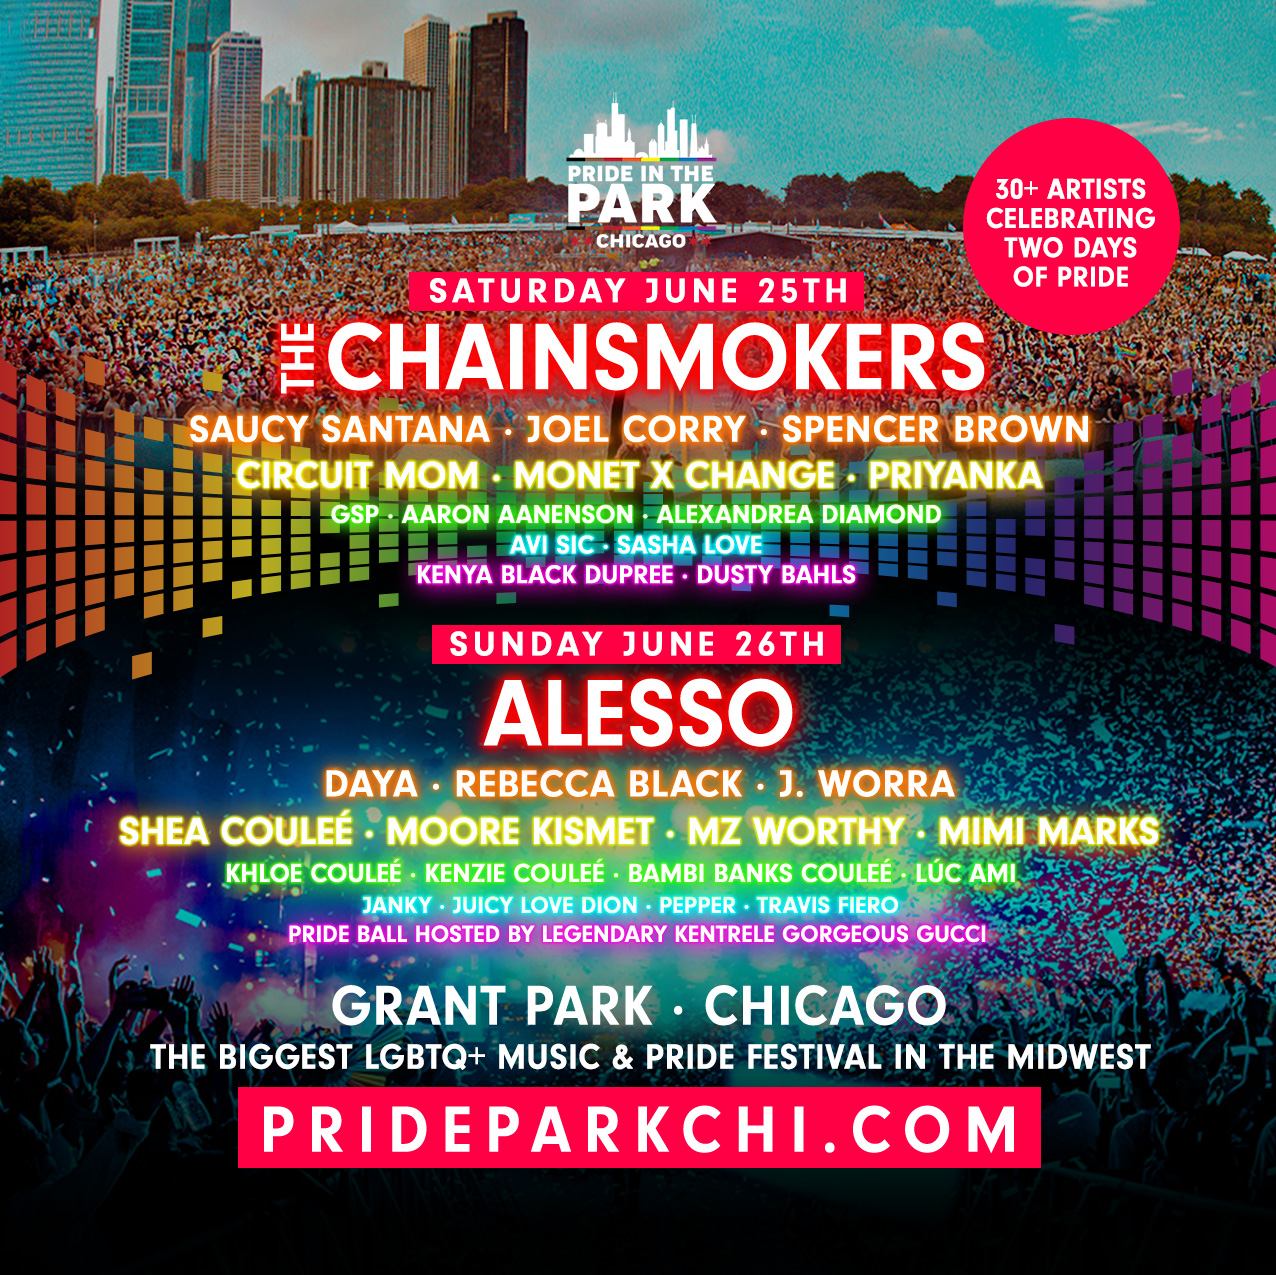 Buy Tickets to Pride in the Park Chicago 2022 in Chicago on Jun 25